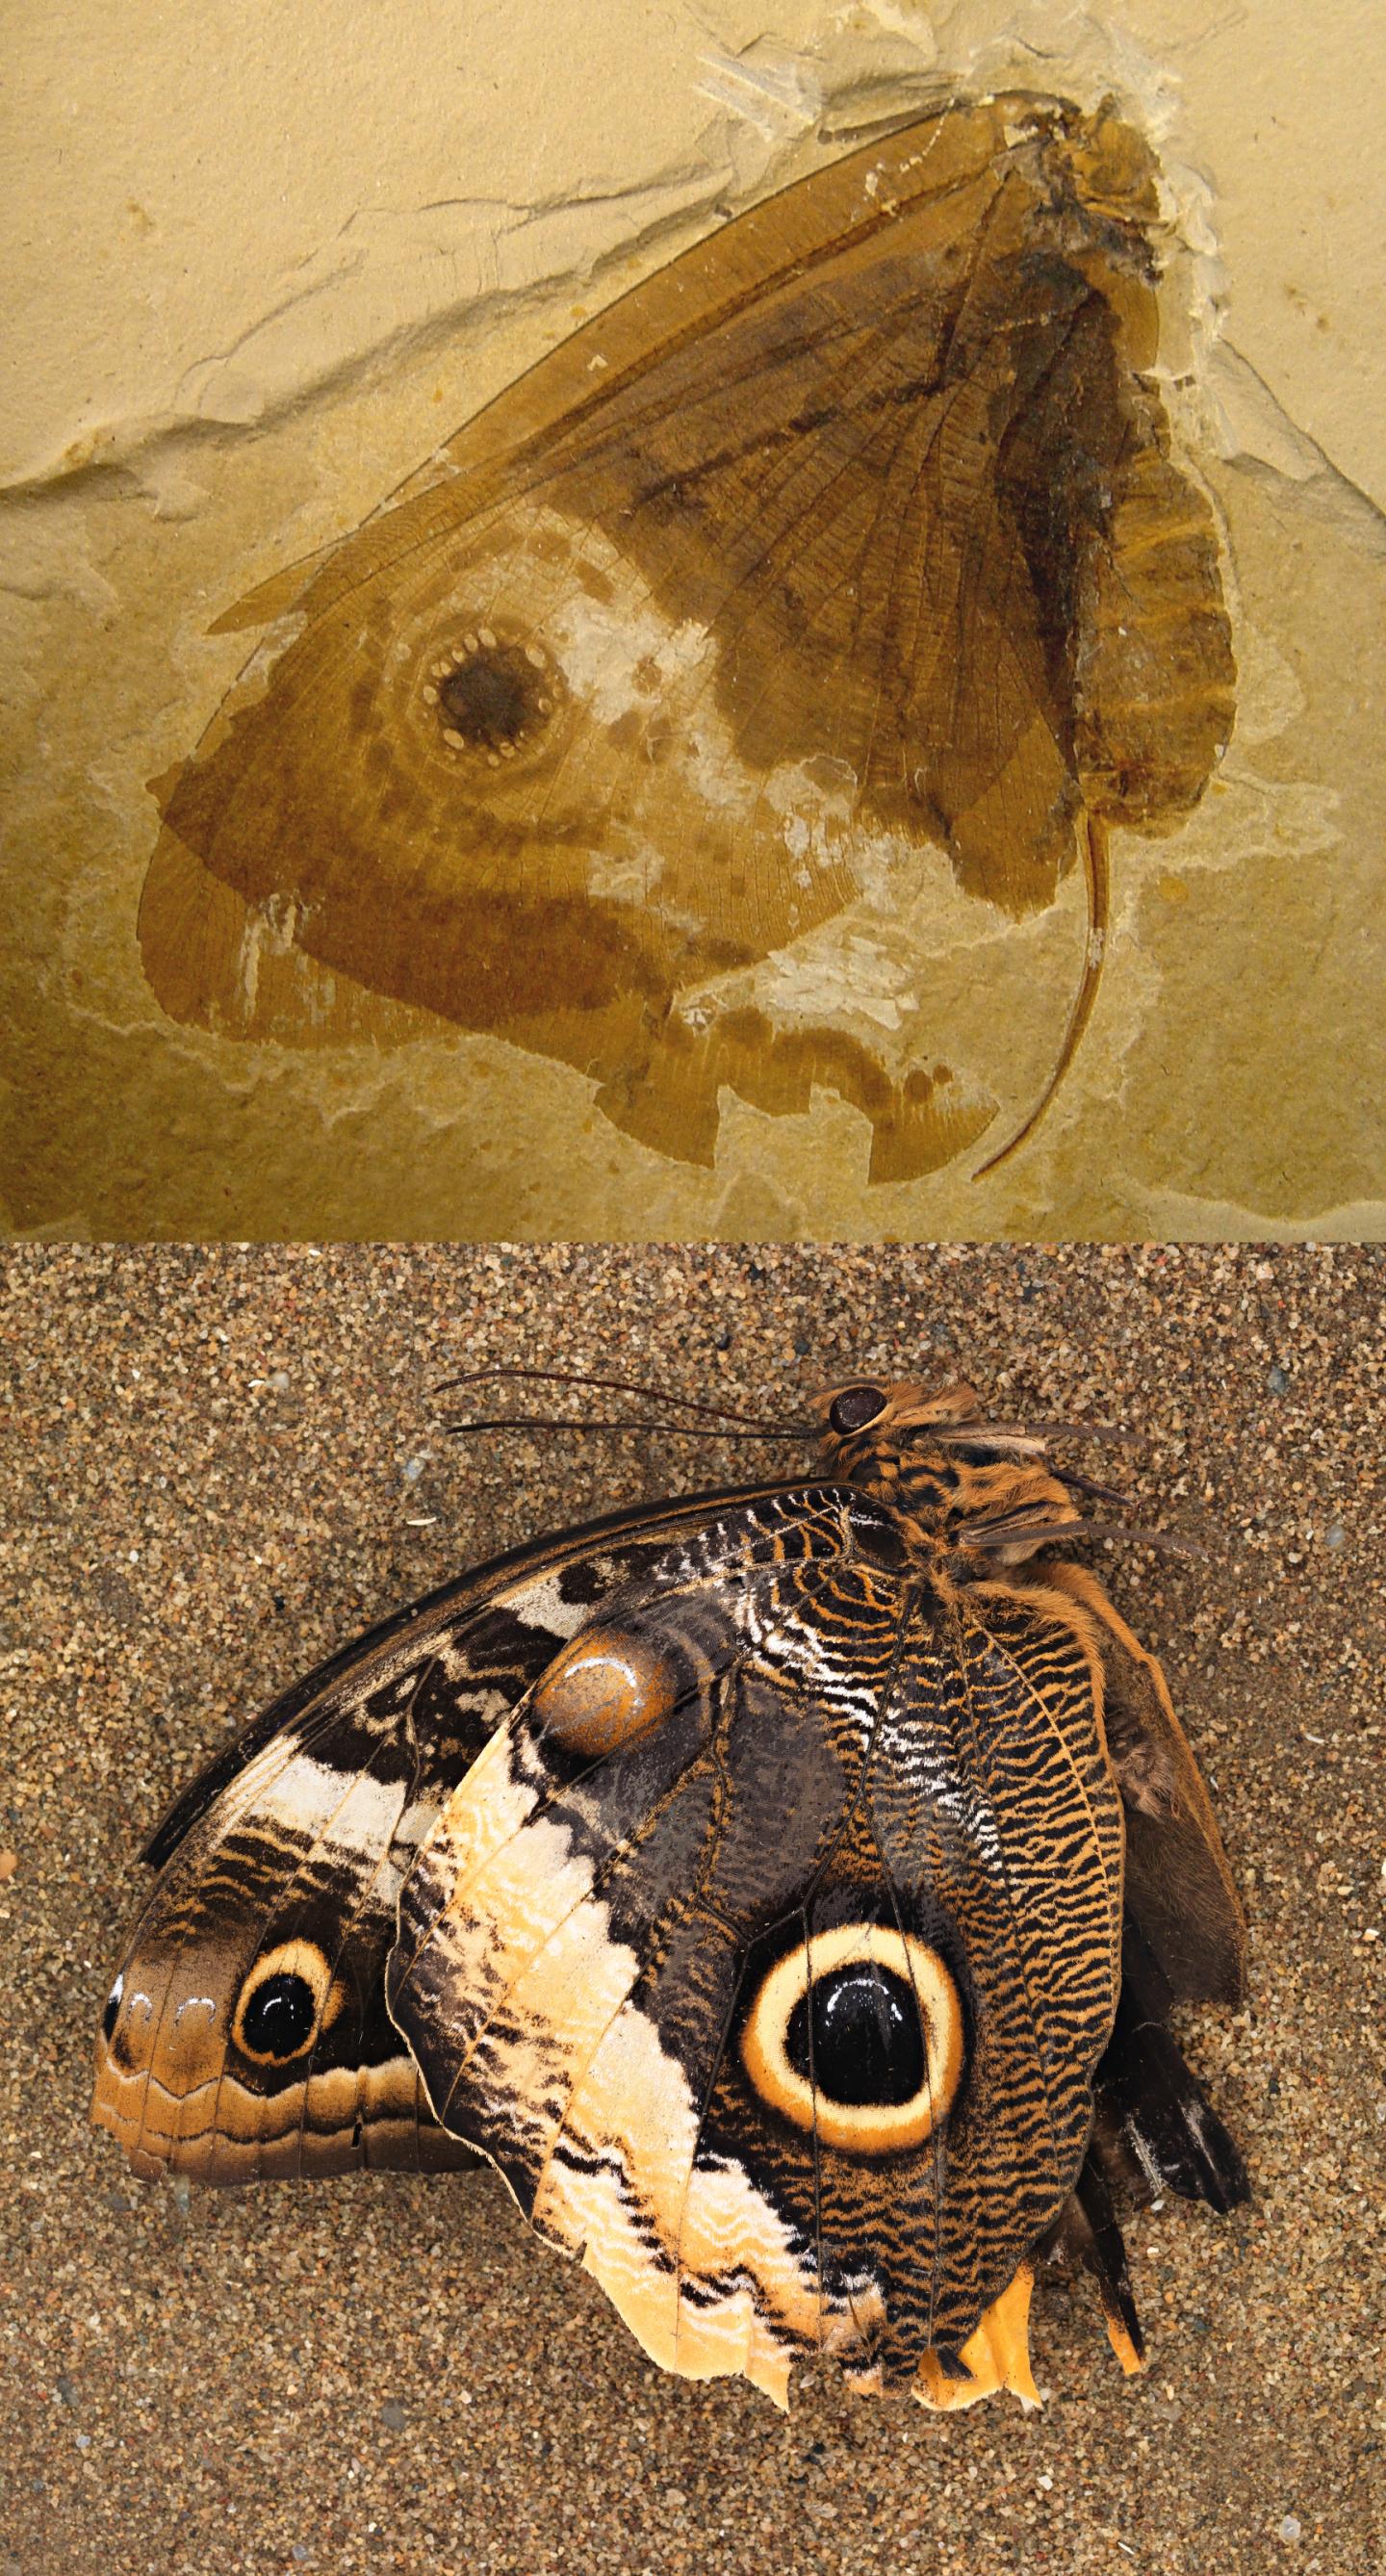 Fossilized Kalligrammatid Lacewing Compared to a Modern Owl Butterfly